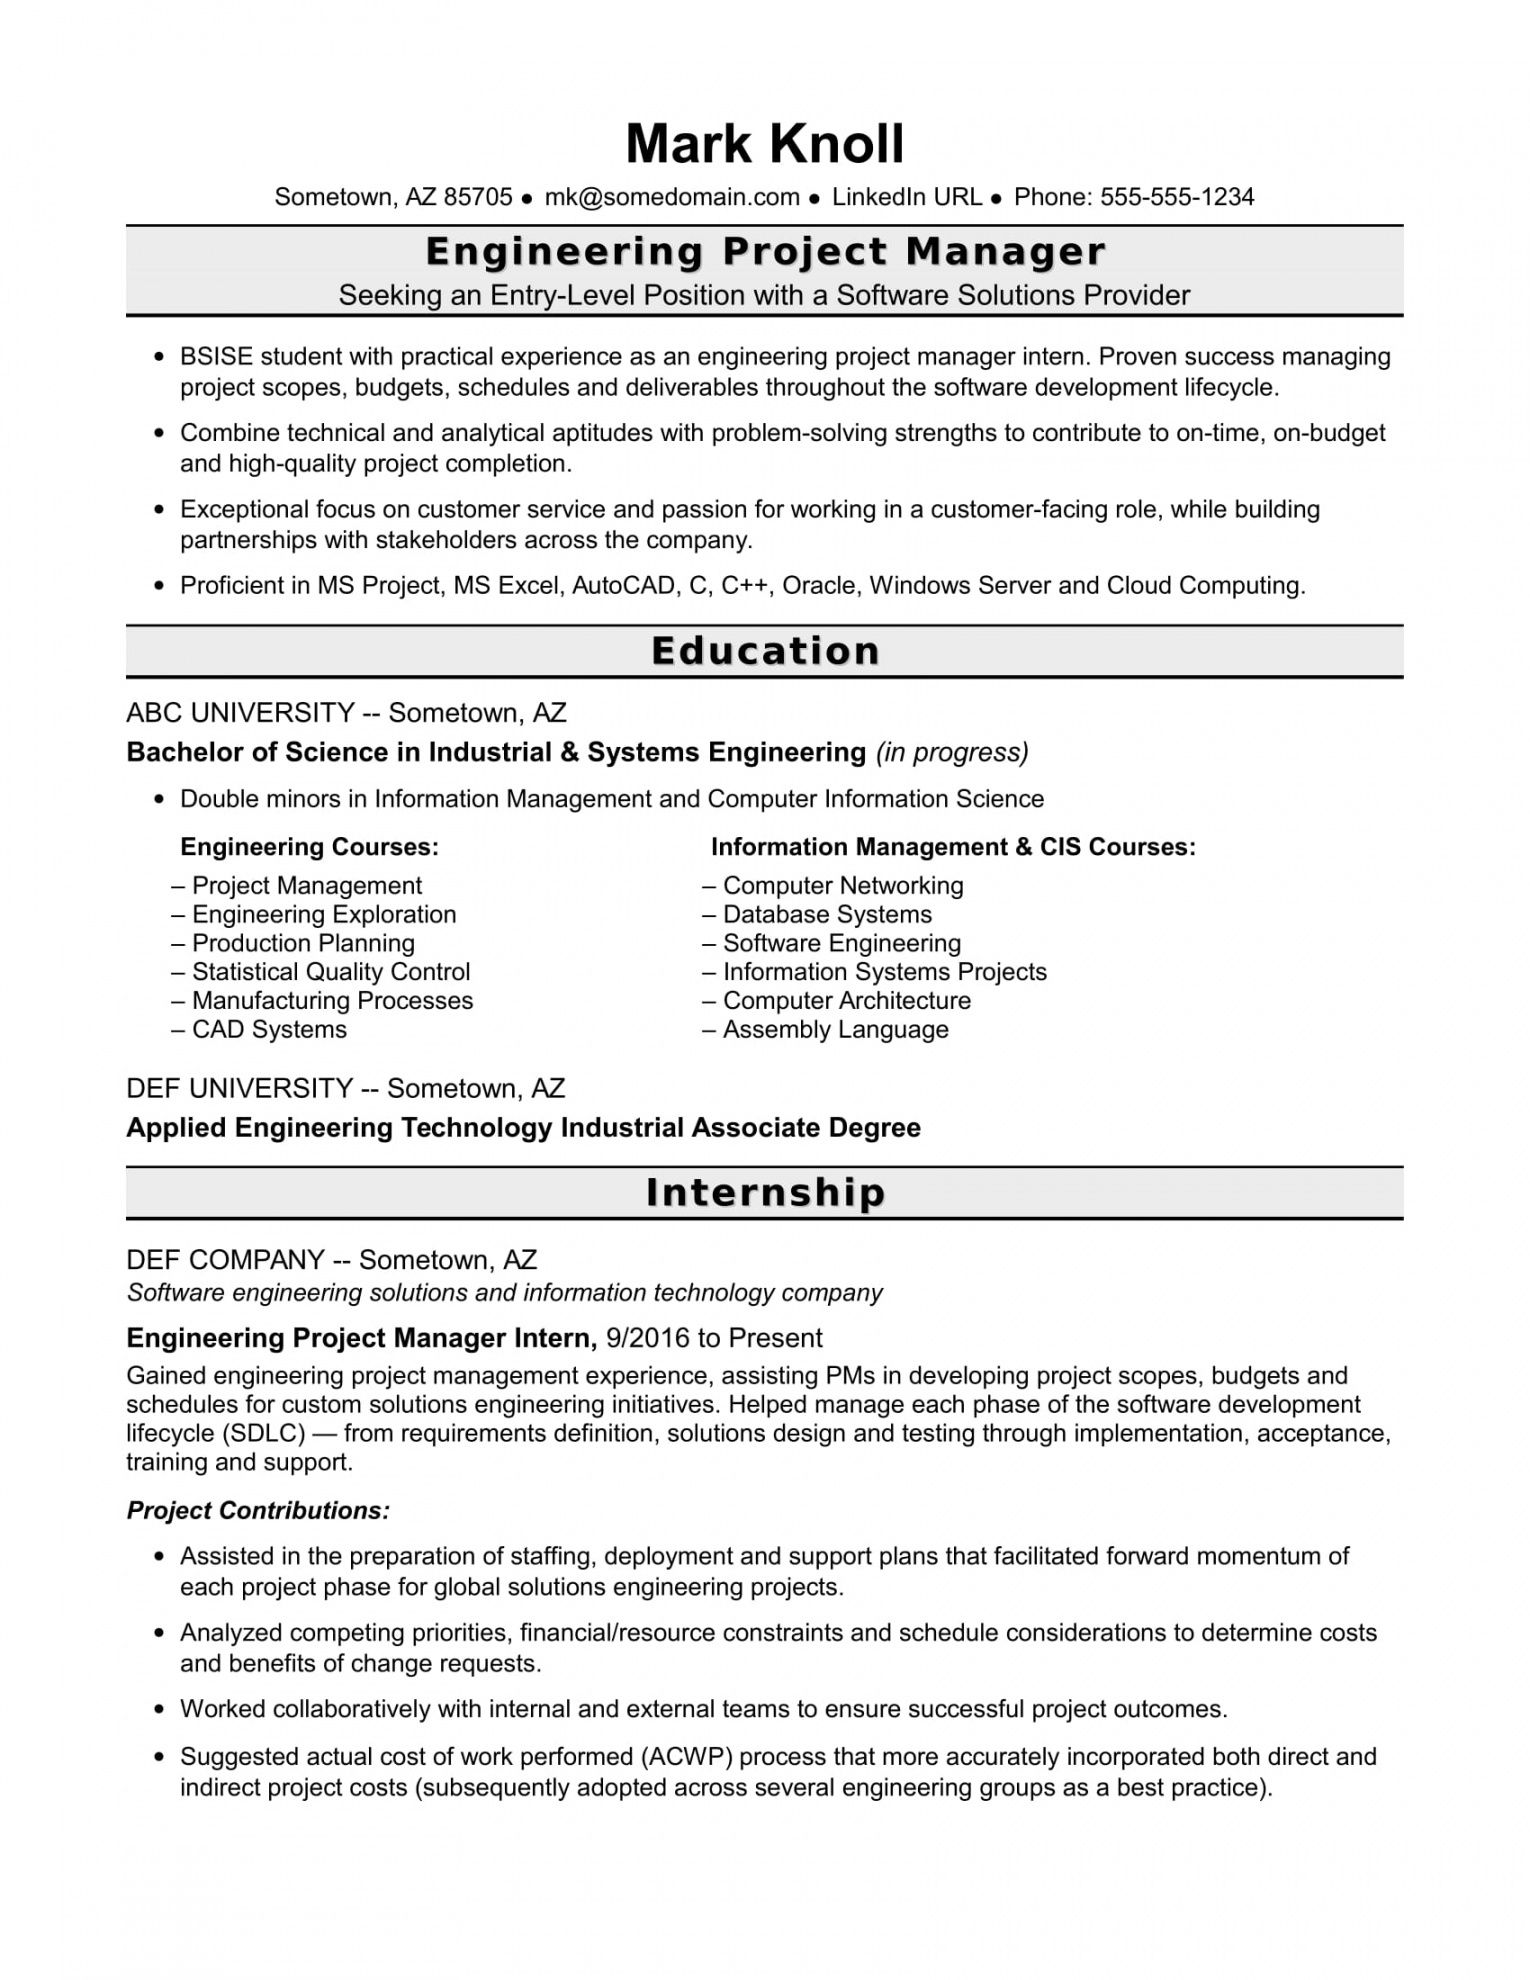 free entrylevel project manager resume for engineers  monster manufacturing project manager job description template and sample